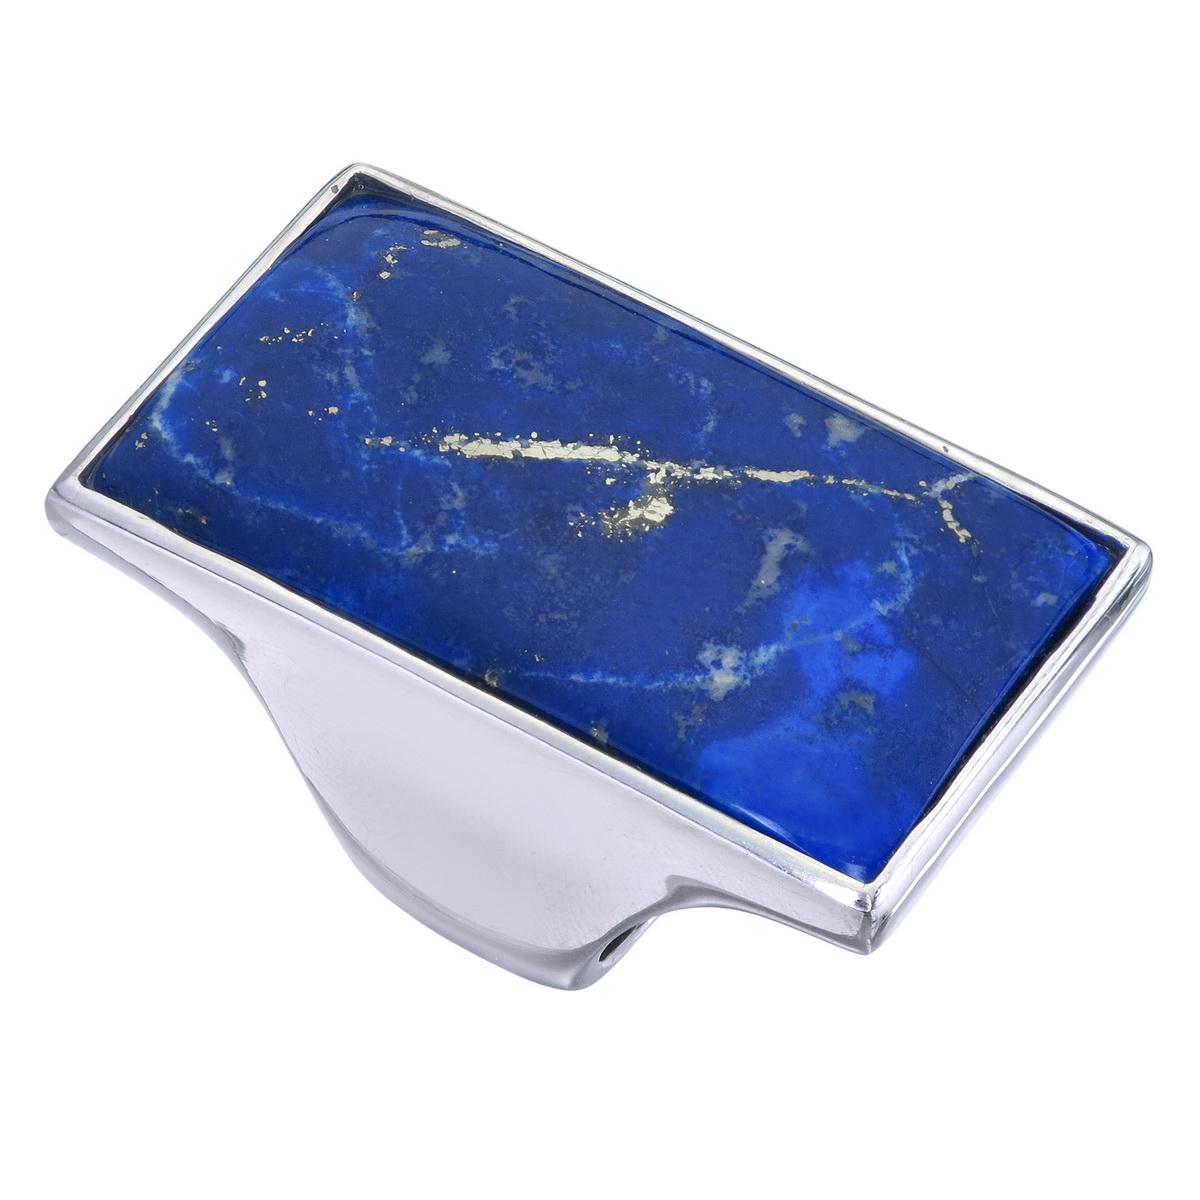 Orloff of Denmark; 38.4 carat Lapis Lazuli Sculpture ring fashioned out of 925 Sterling Silver.

From our latest collection based solely on the beautiful Lapis Lazuli.
This piece features an impressive rectangle cut lapis lazuli which has been